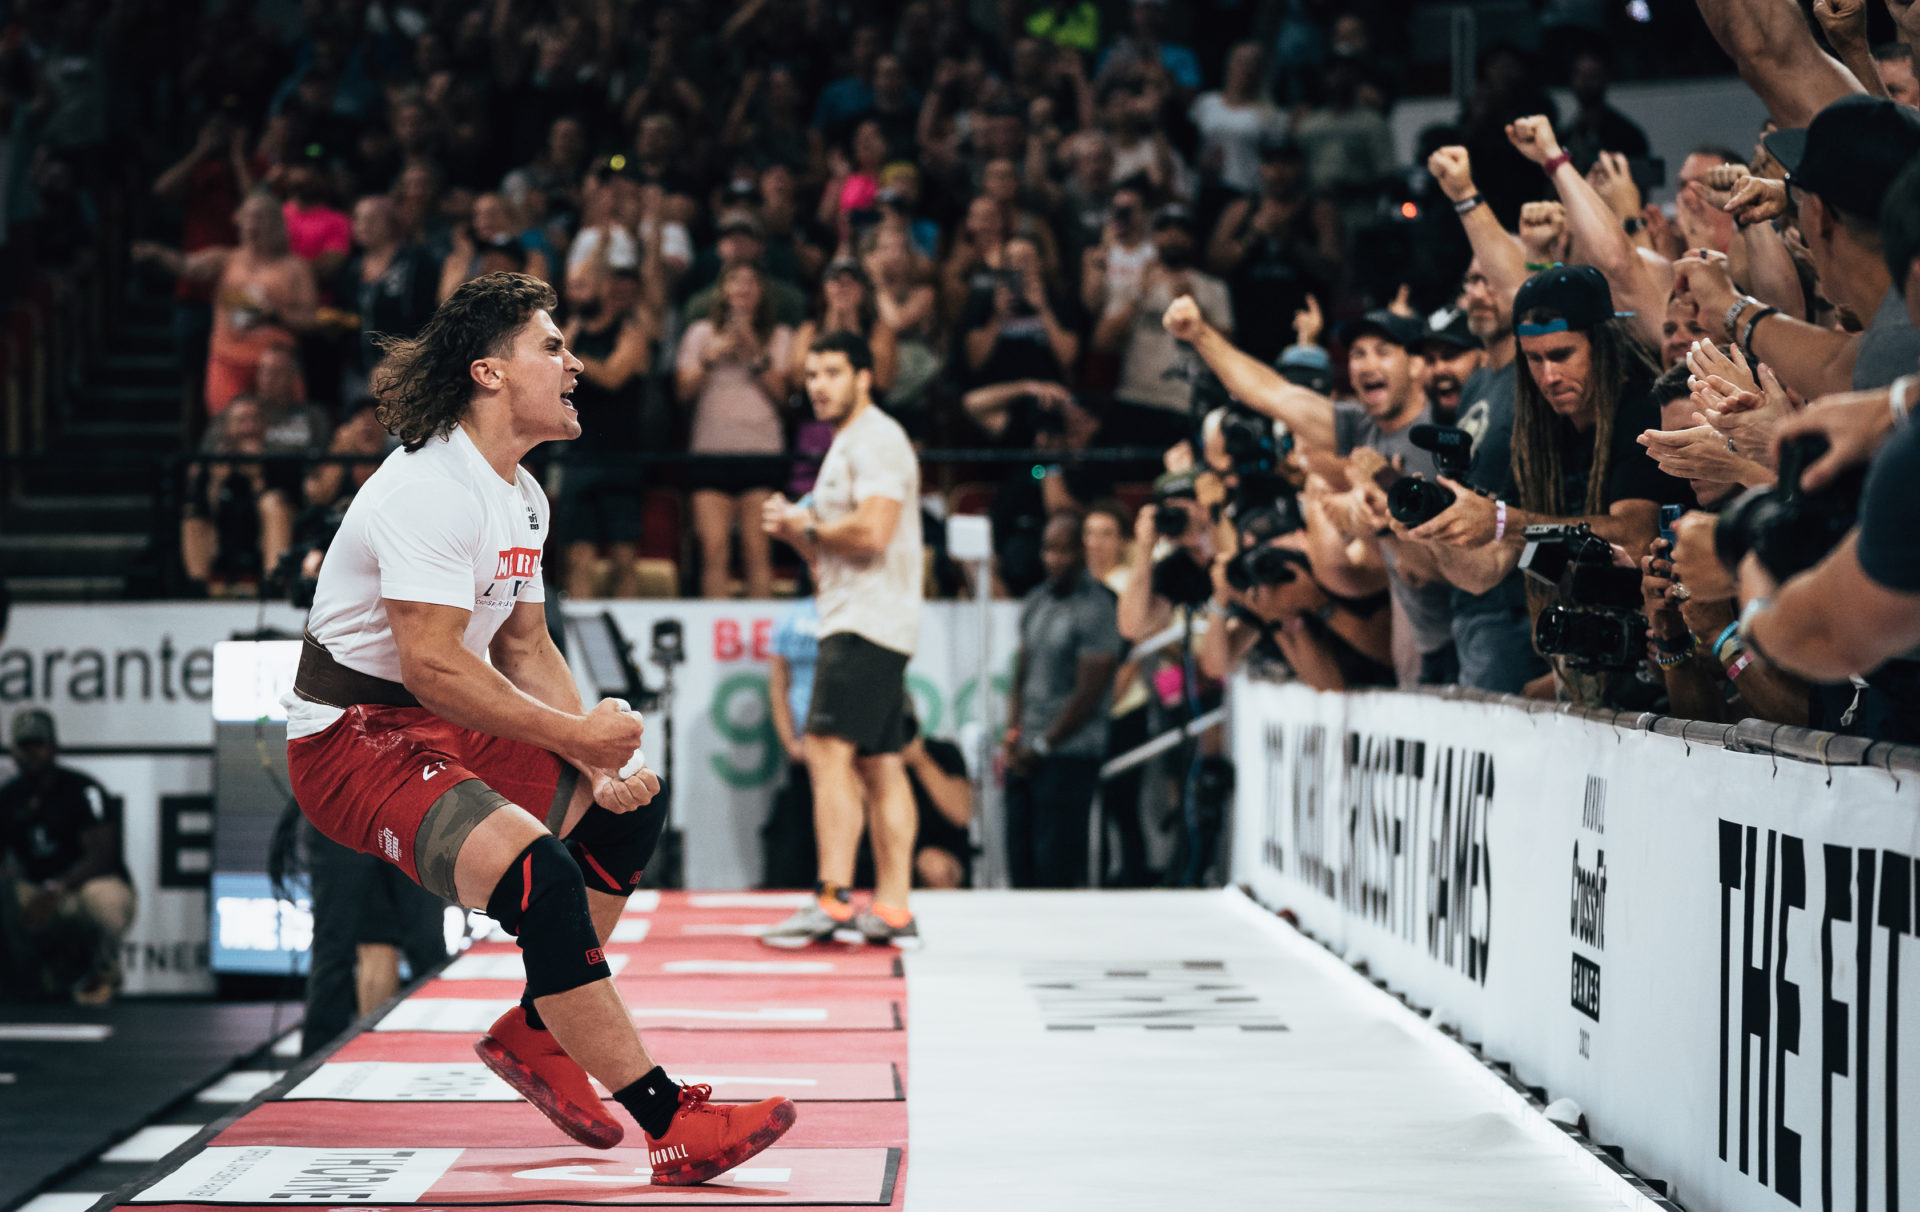 3 Events We Could Likely See At The 2023 CrossFit Games